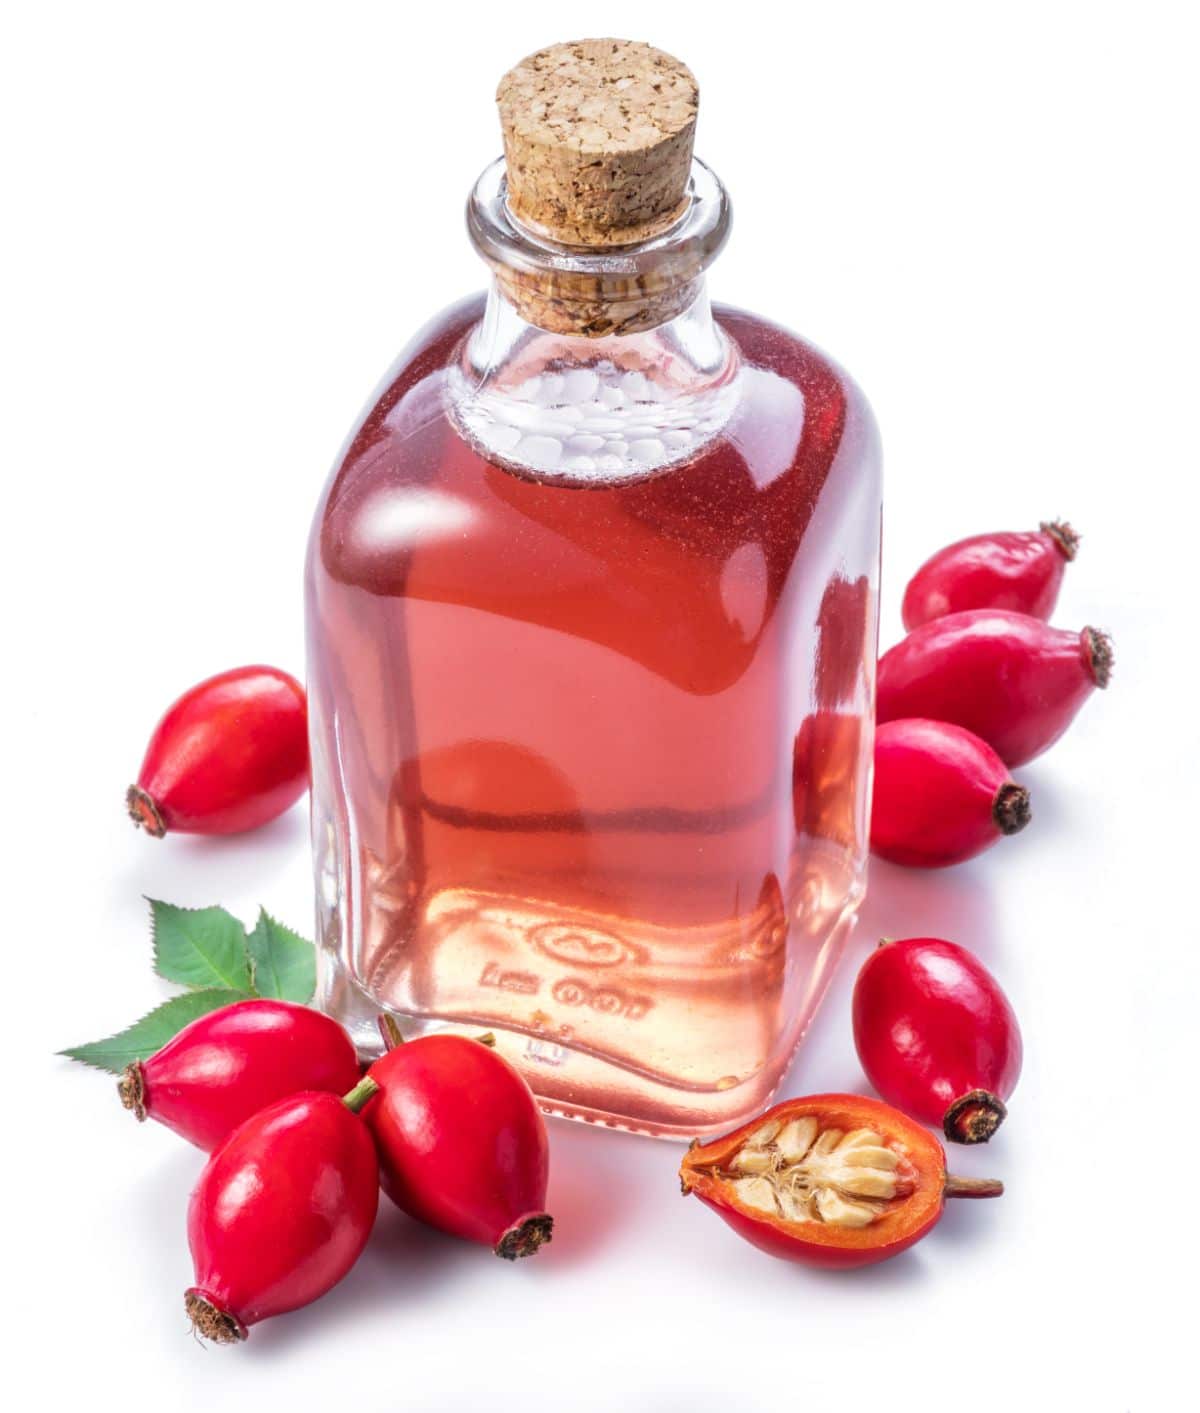 Rose hips surrounding a bottle of rose hip syrup